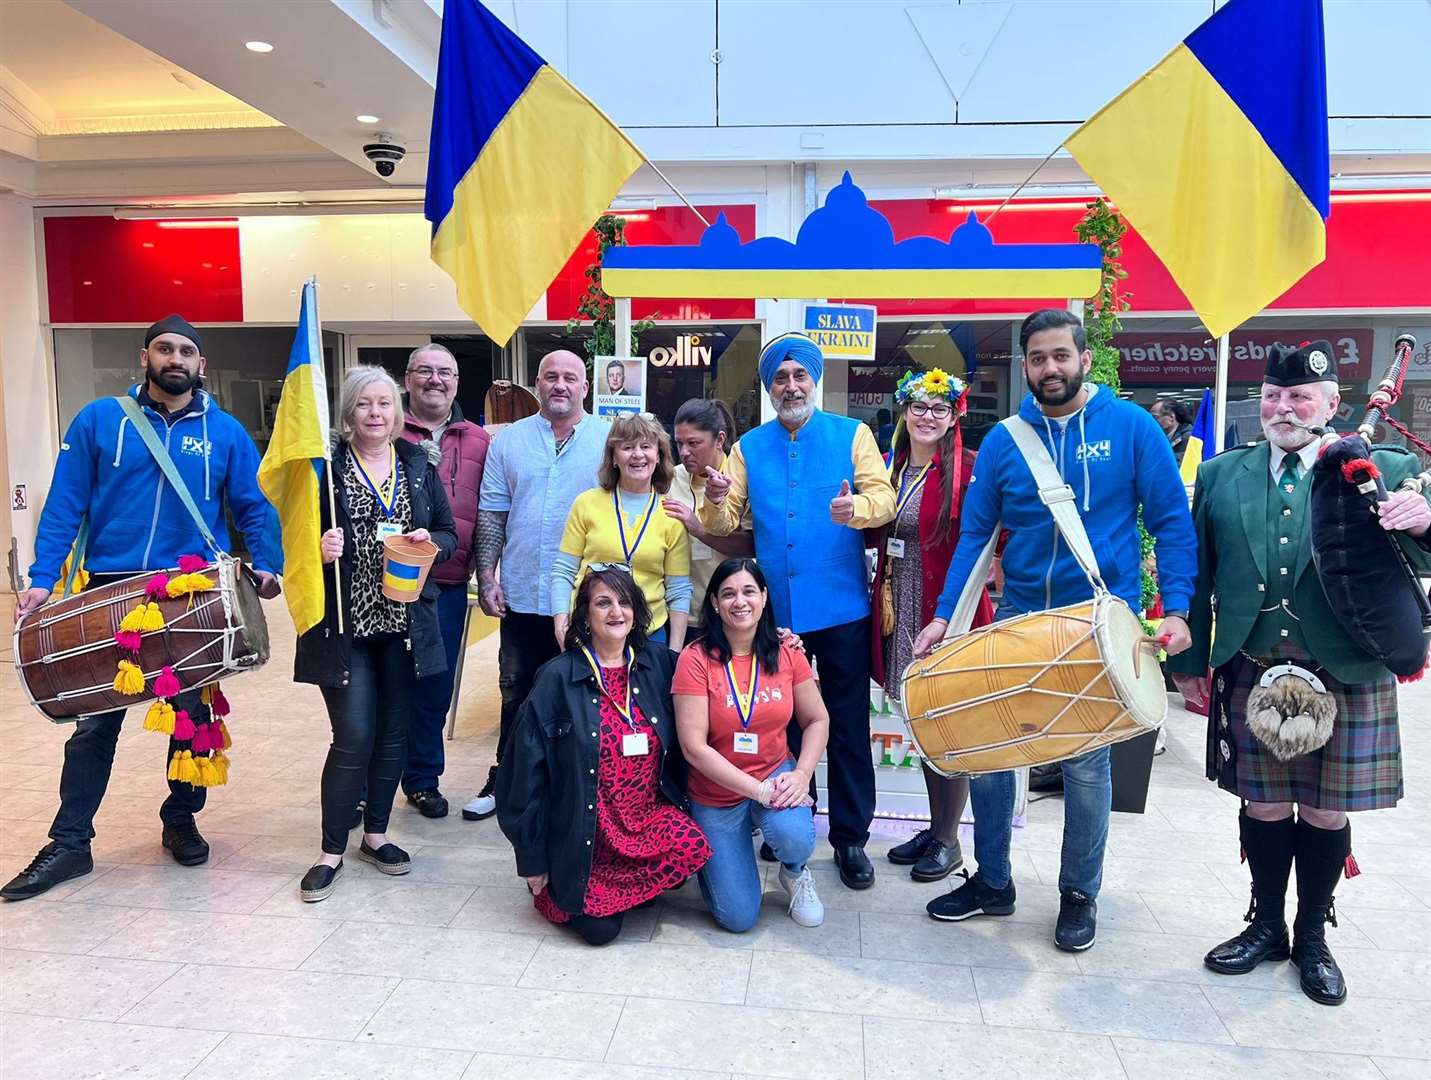 Andy was joined by the band Four by Four Bhangra and a Scottish bagpiper from Folkestone